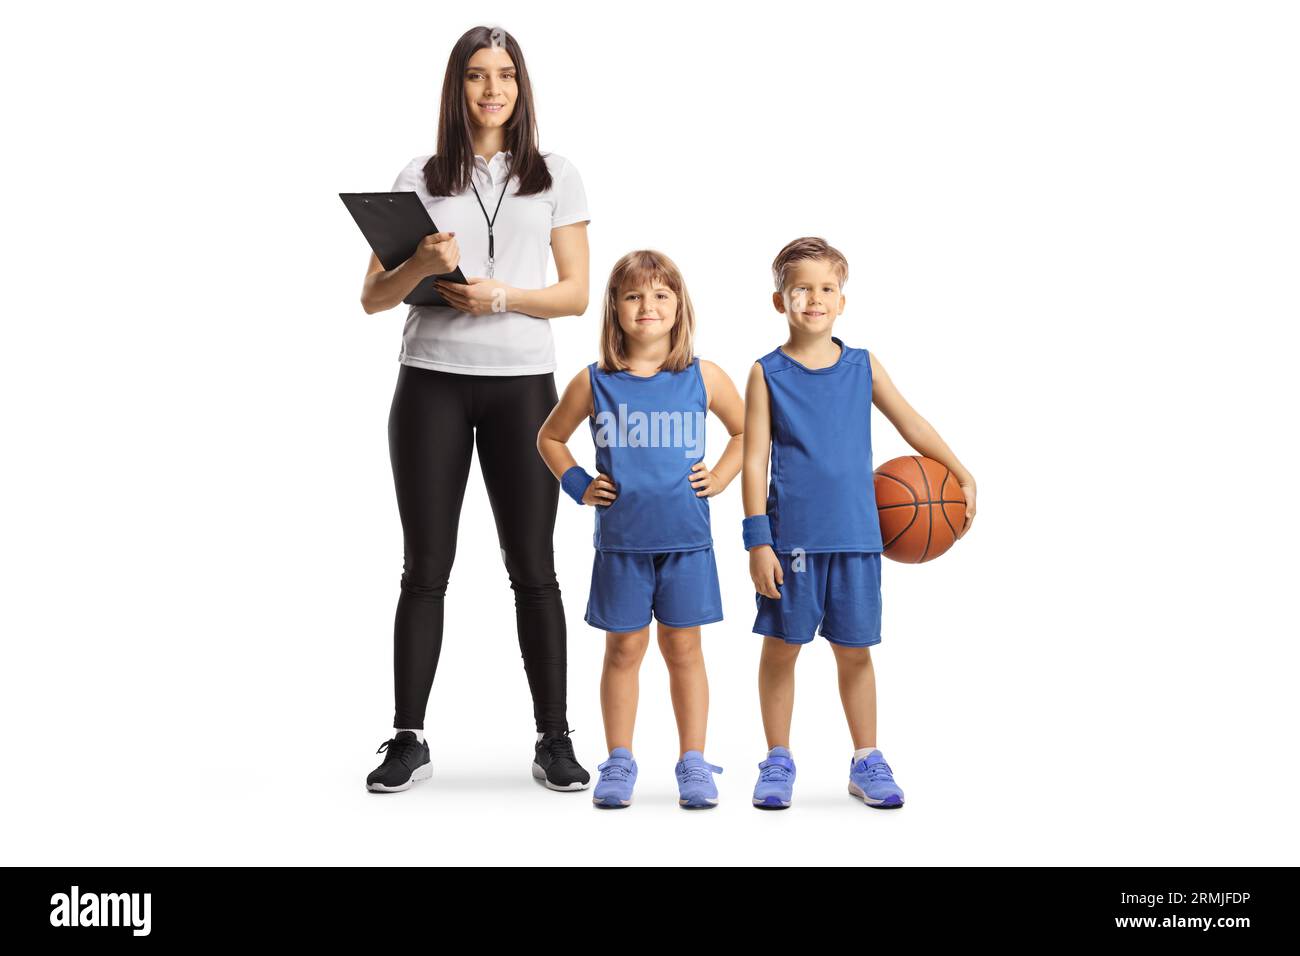 Female basketball coach standing with children in sport jerseys isolated on white background Stock Photo